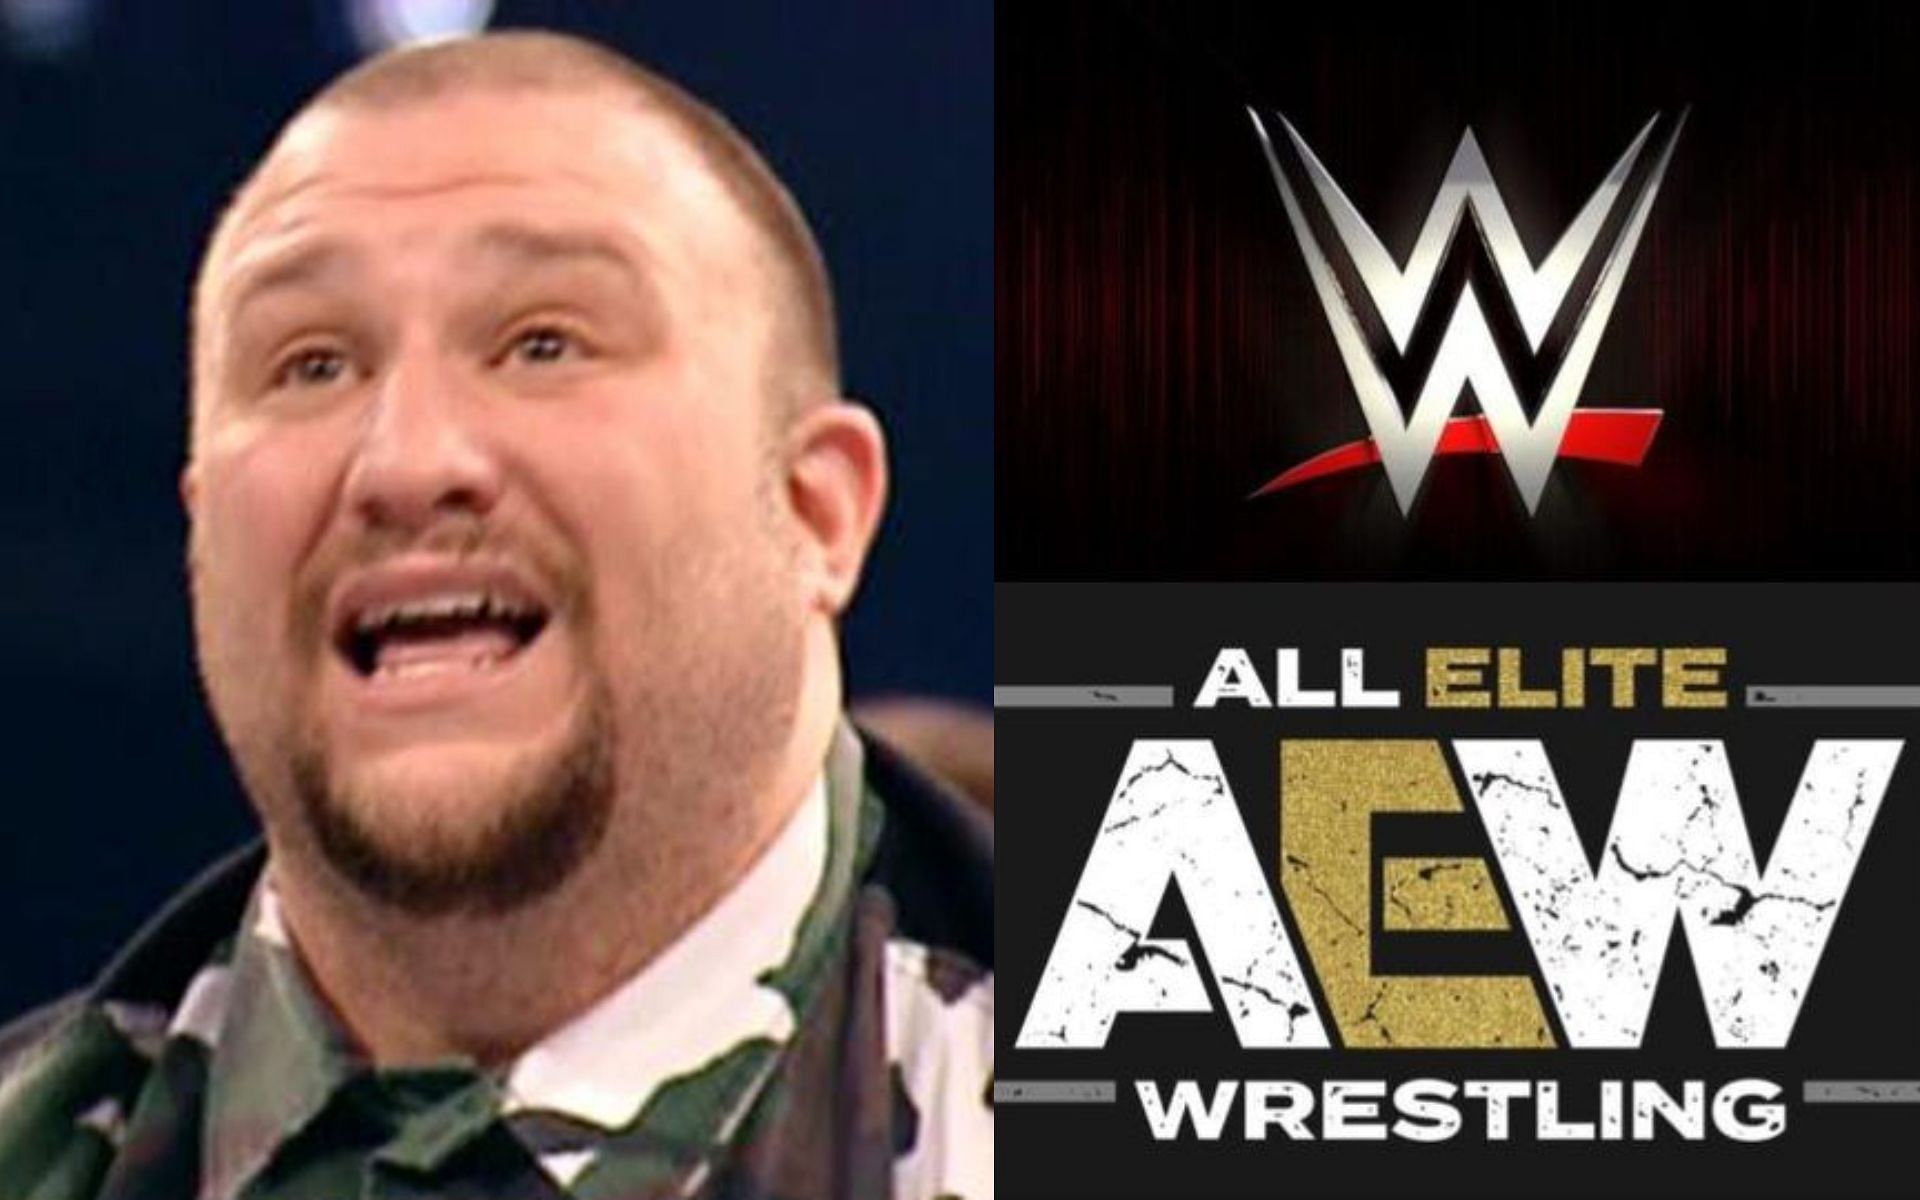 Bully Ray (left) and AEW and WWE logos (right).